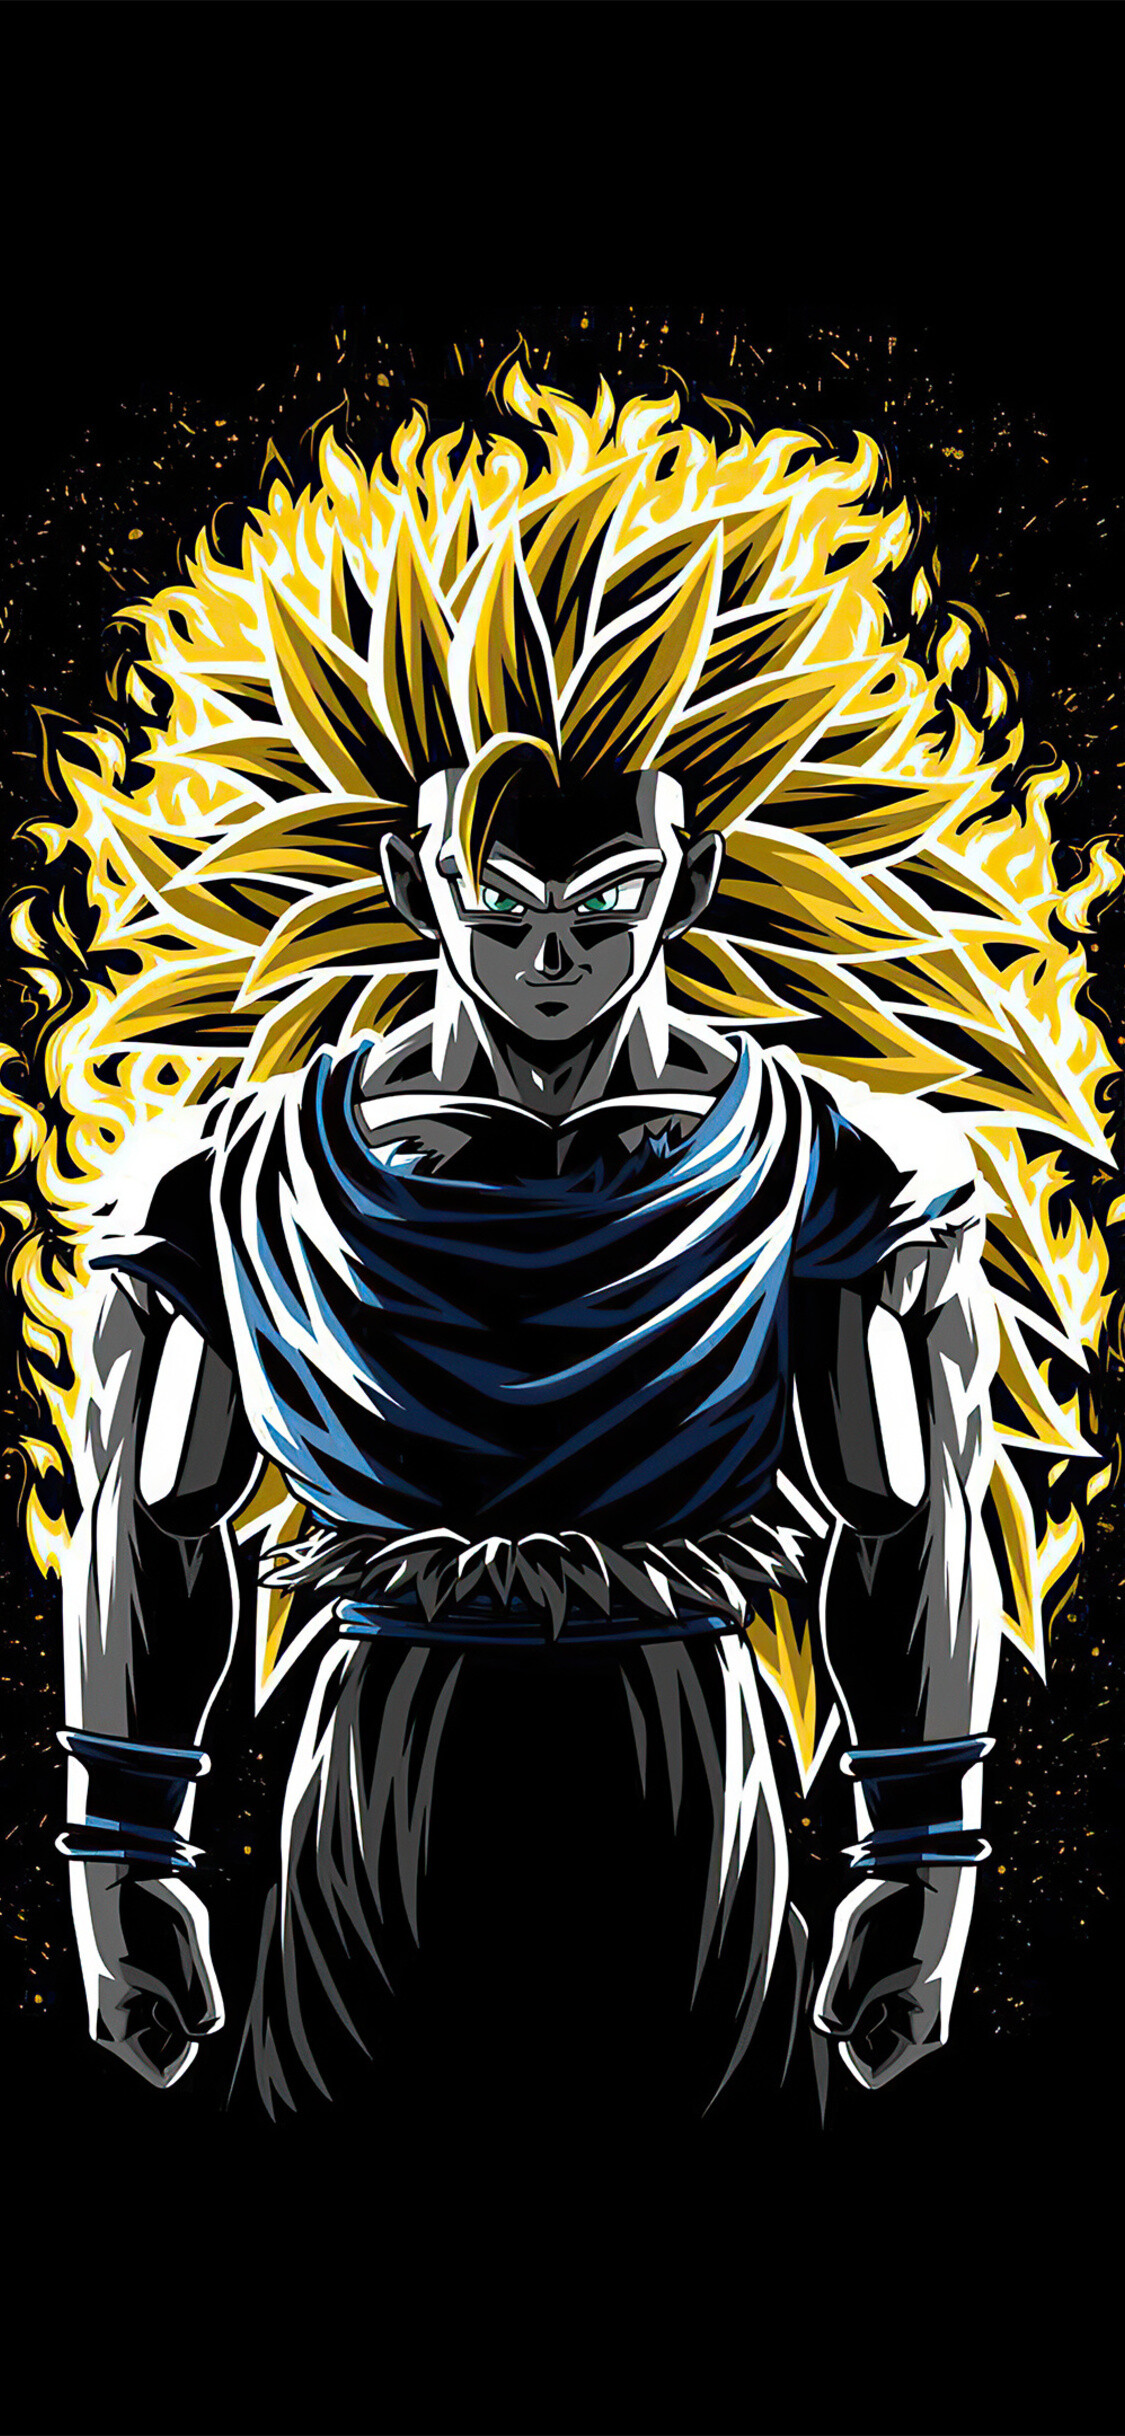 Goku Super Saiyan: The third form of SS, Dragon Ball Z, A Japanese anime television series produced by Toei Animation. 1130x2440 HD Wallpaper.